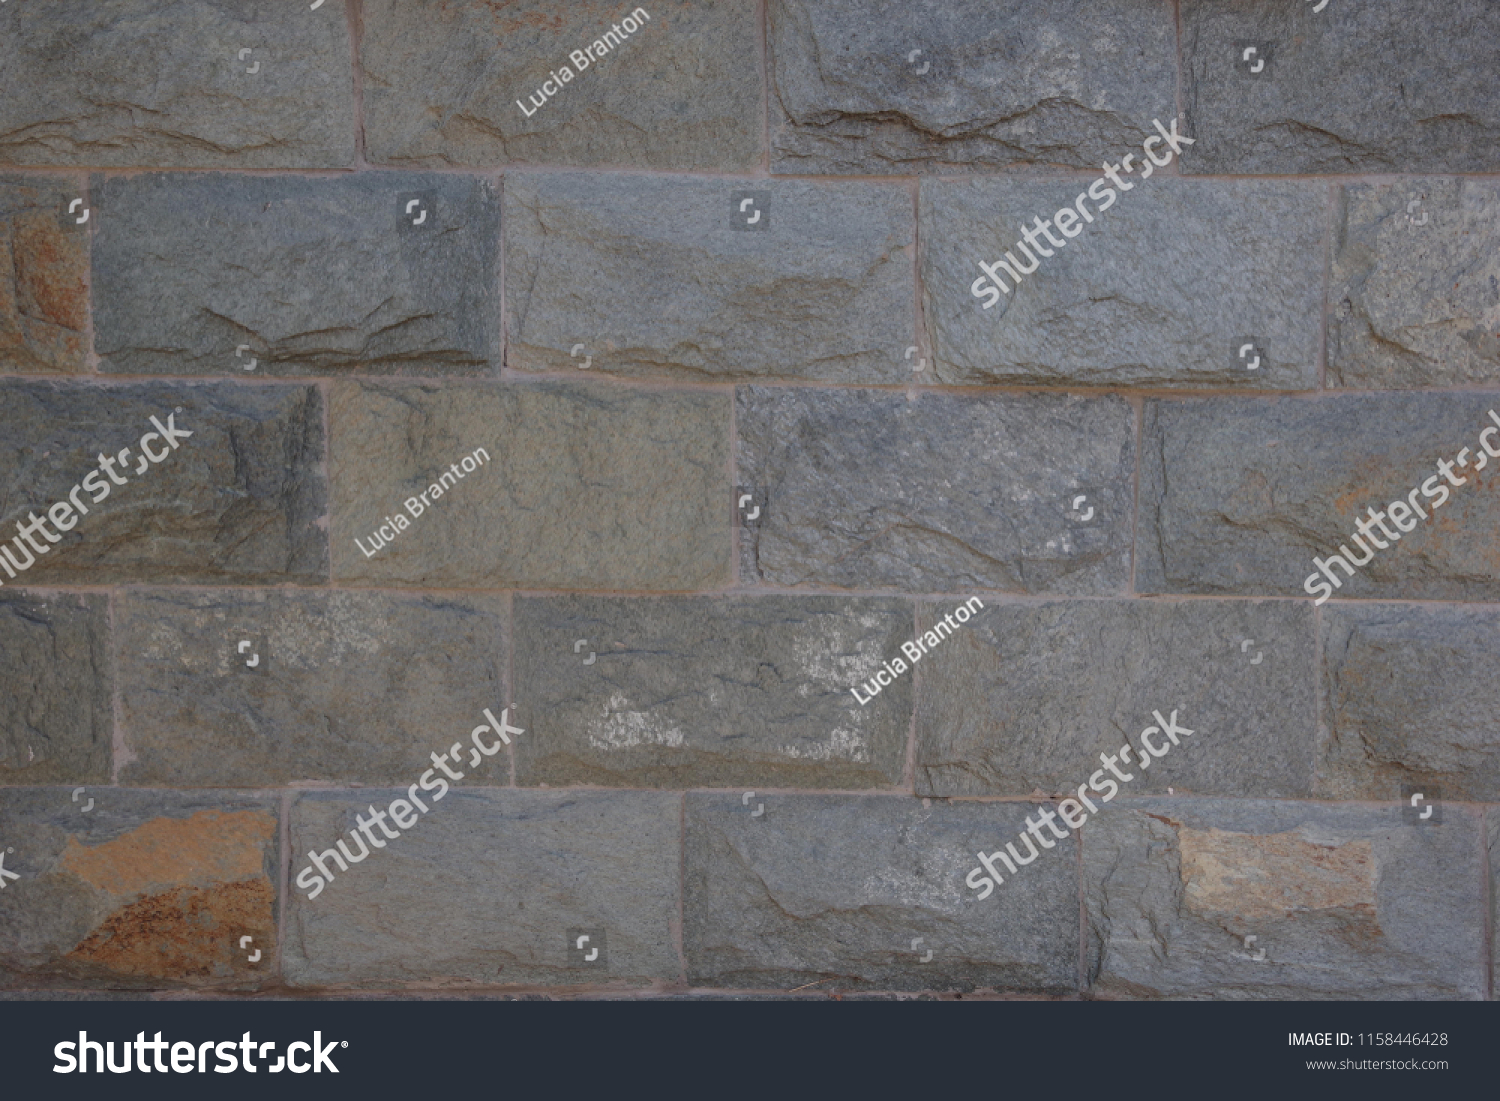 Background wall made of stone. Natural stone.  #1158446428